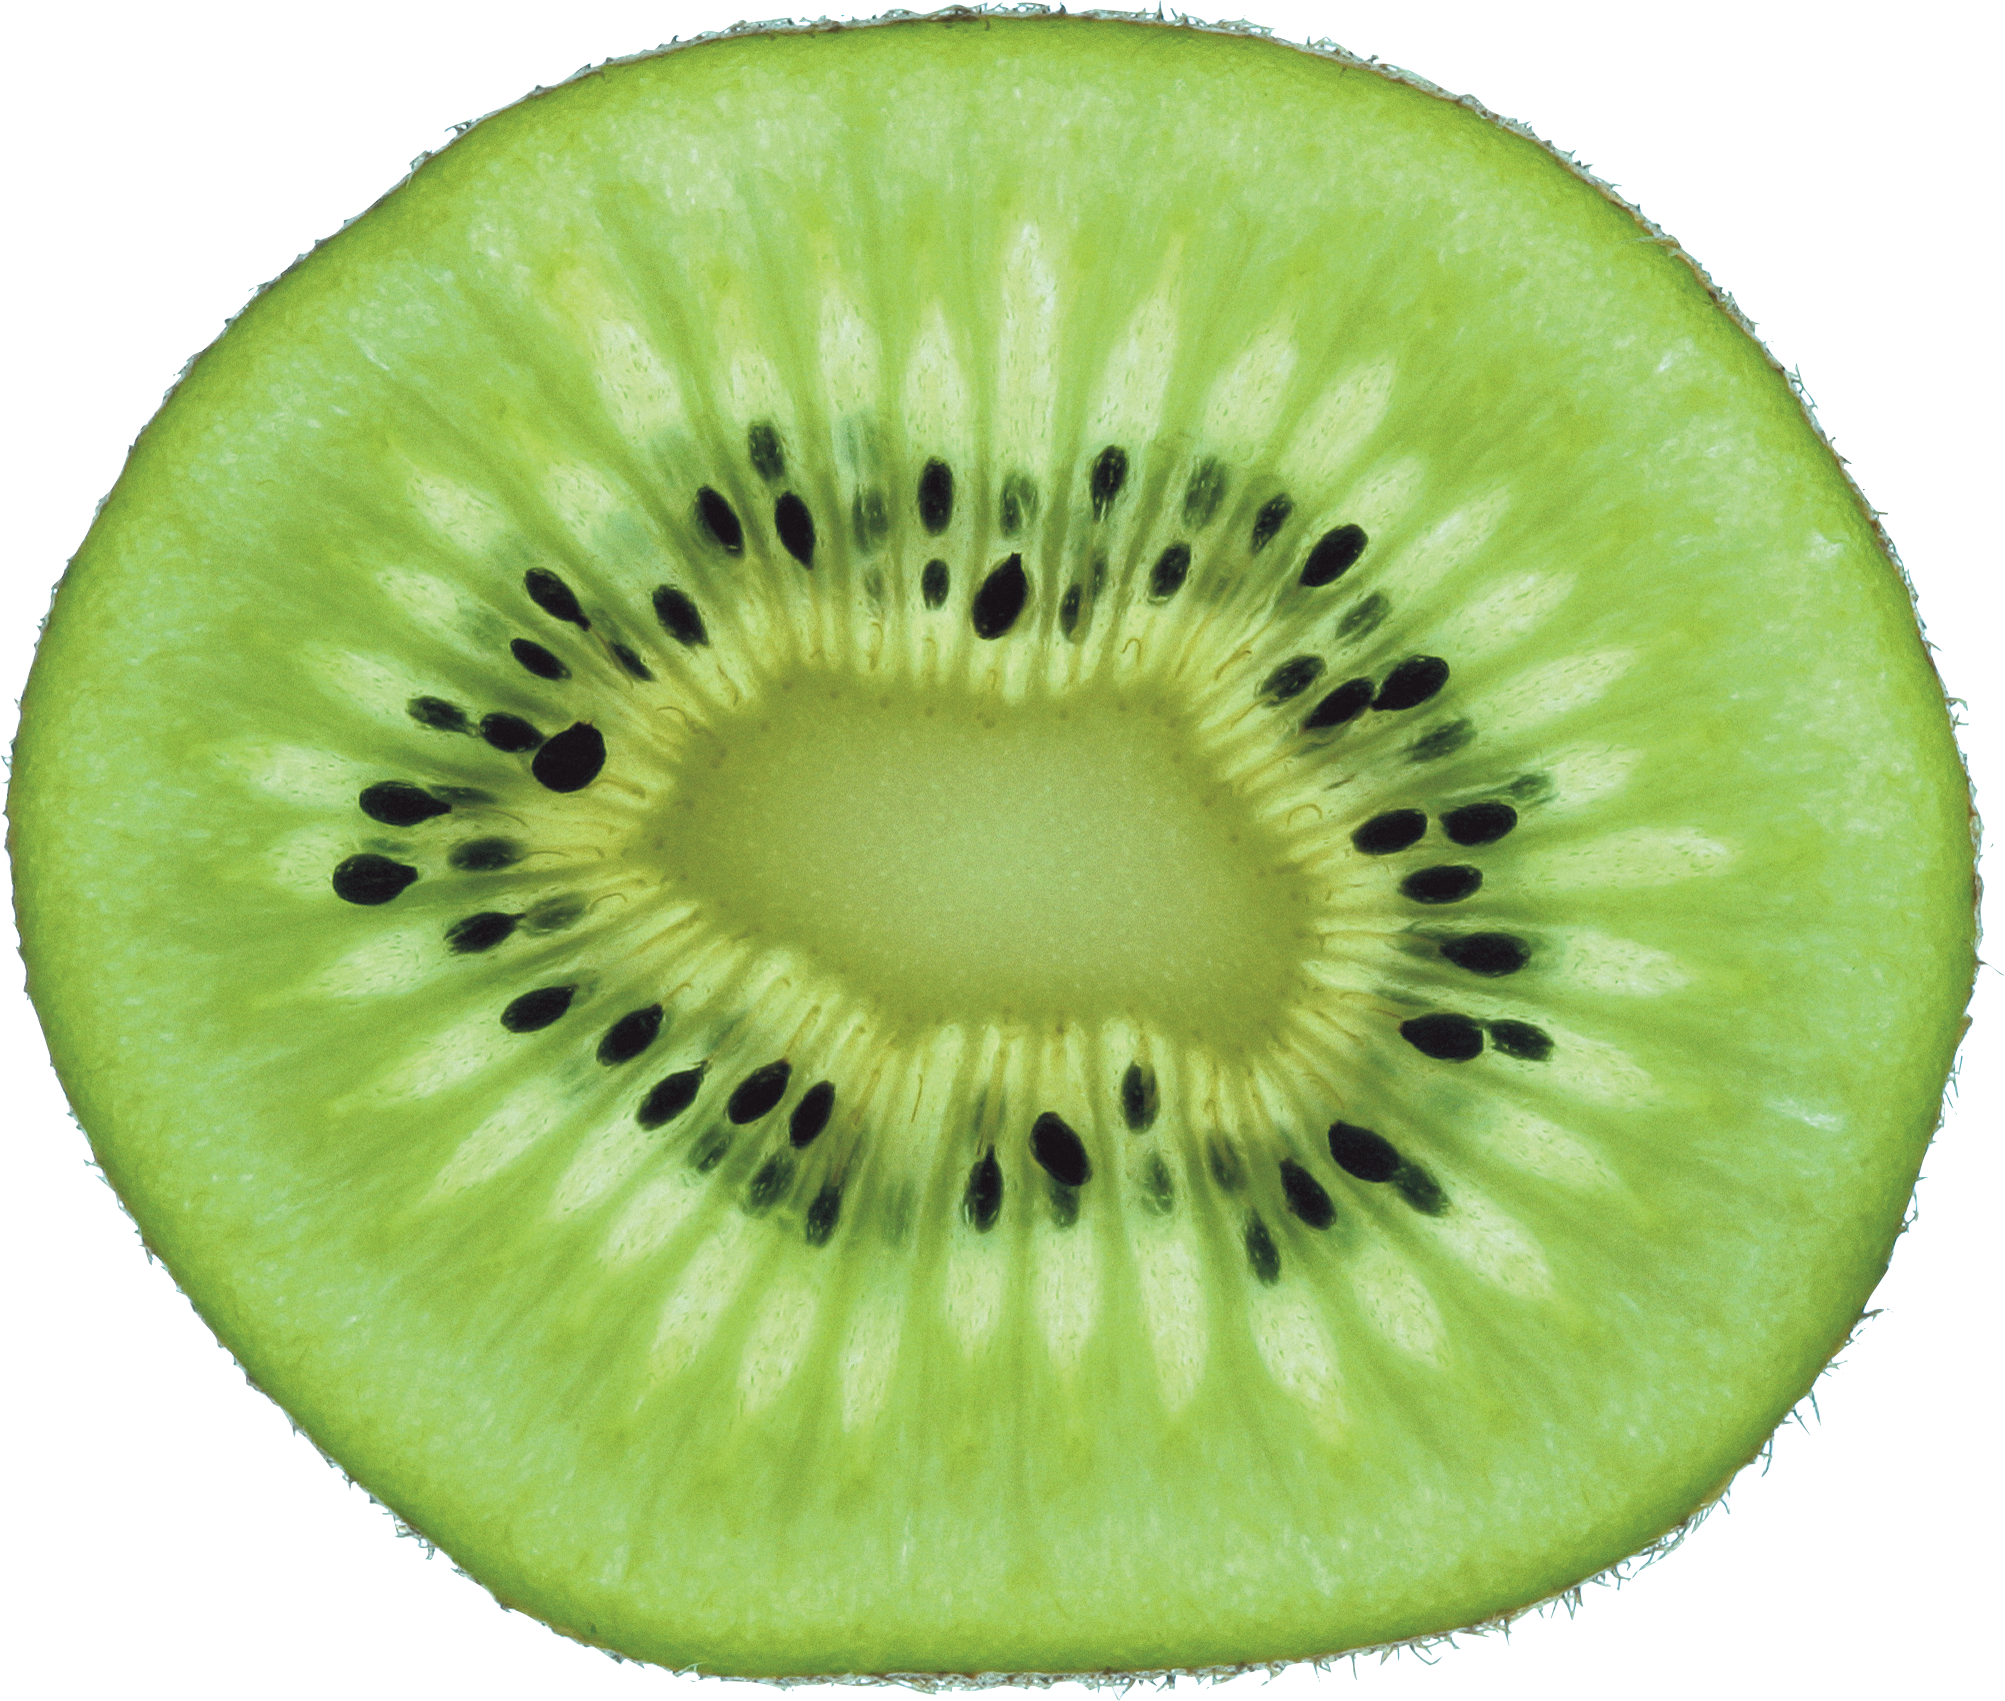 Green cutted kiwi PNG image